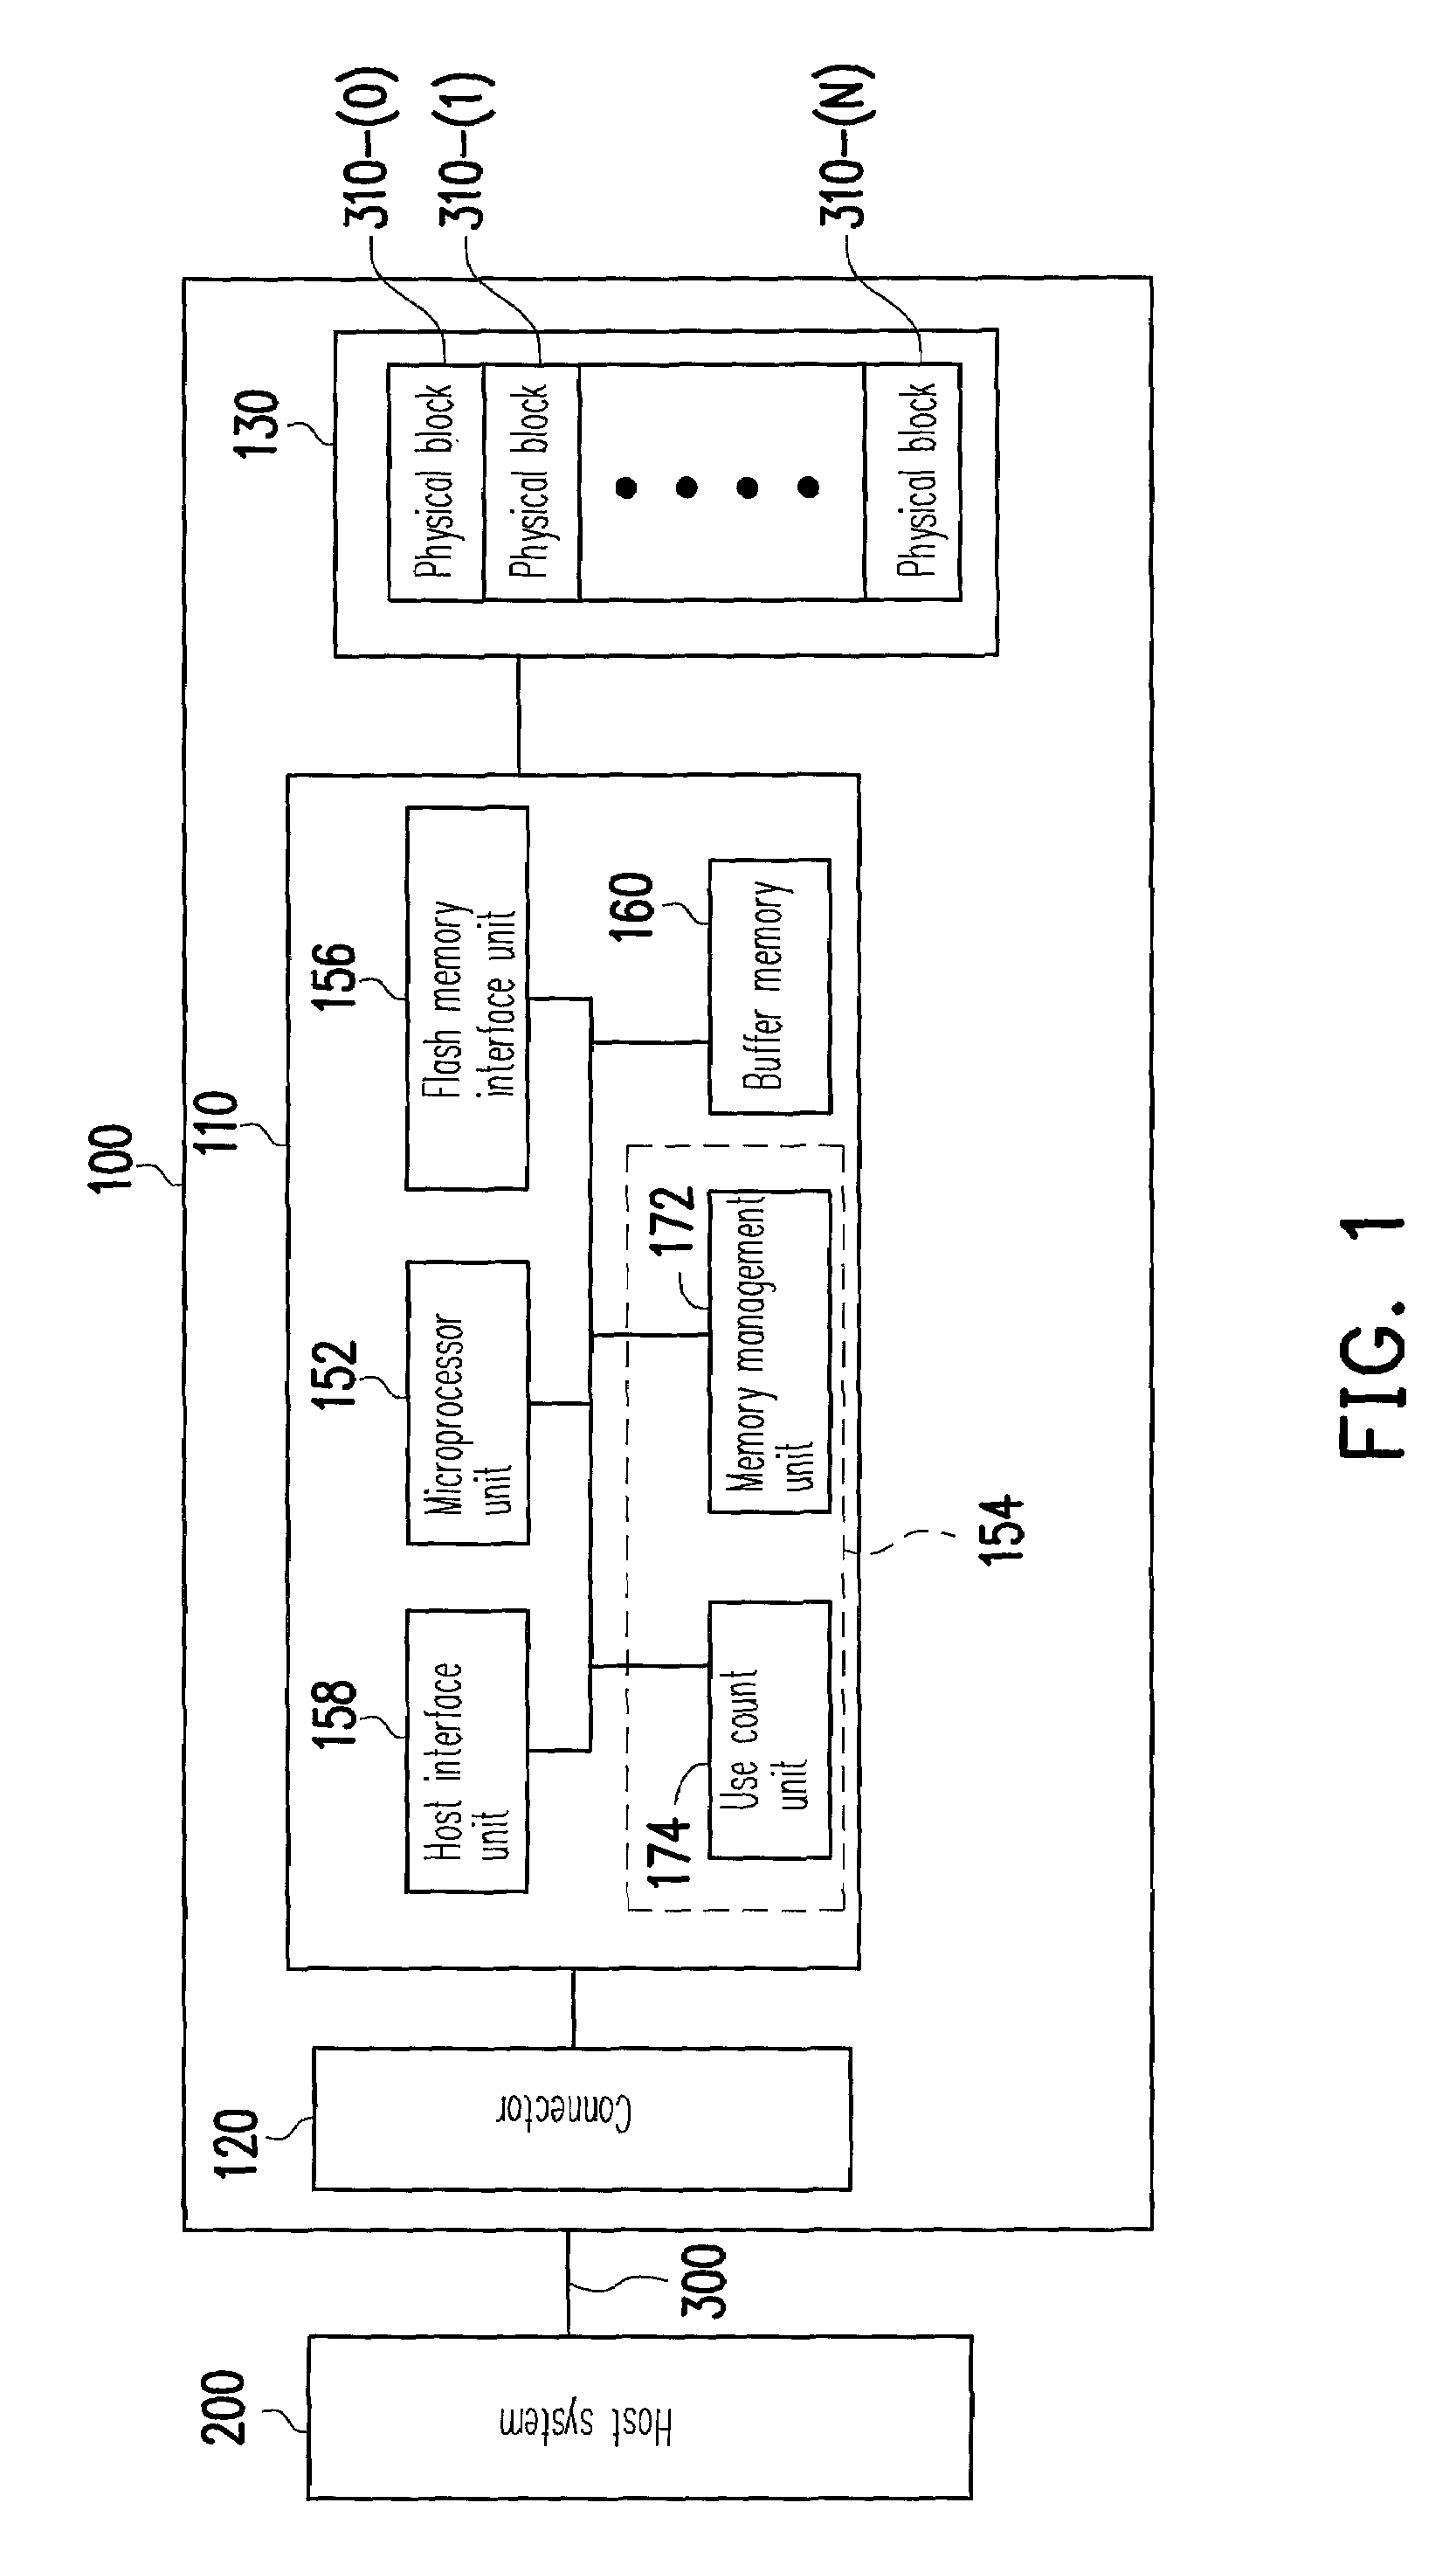 Logical block management method for a flash memory and control circuit storage system using the same